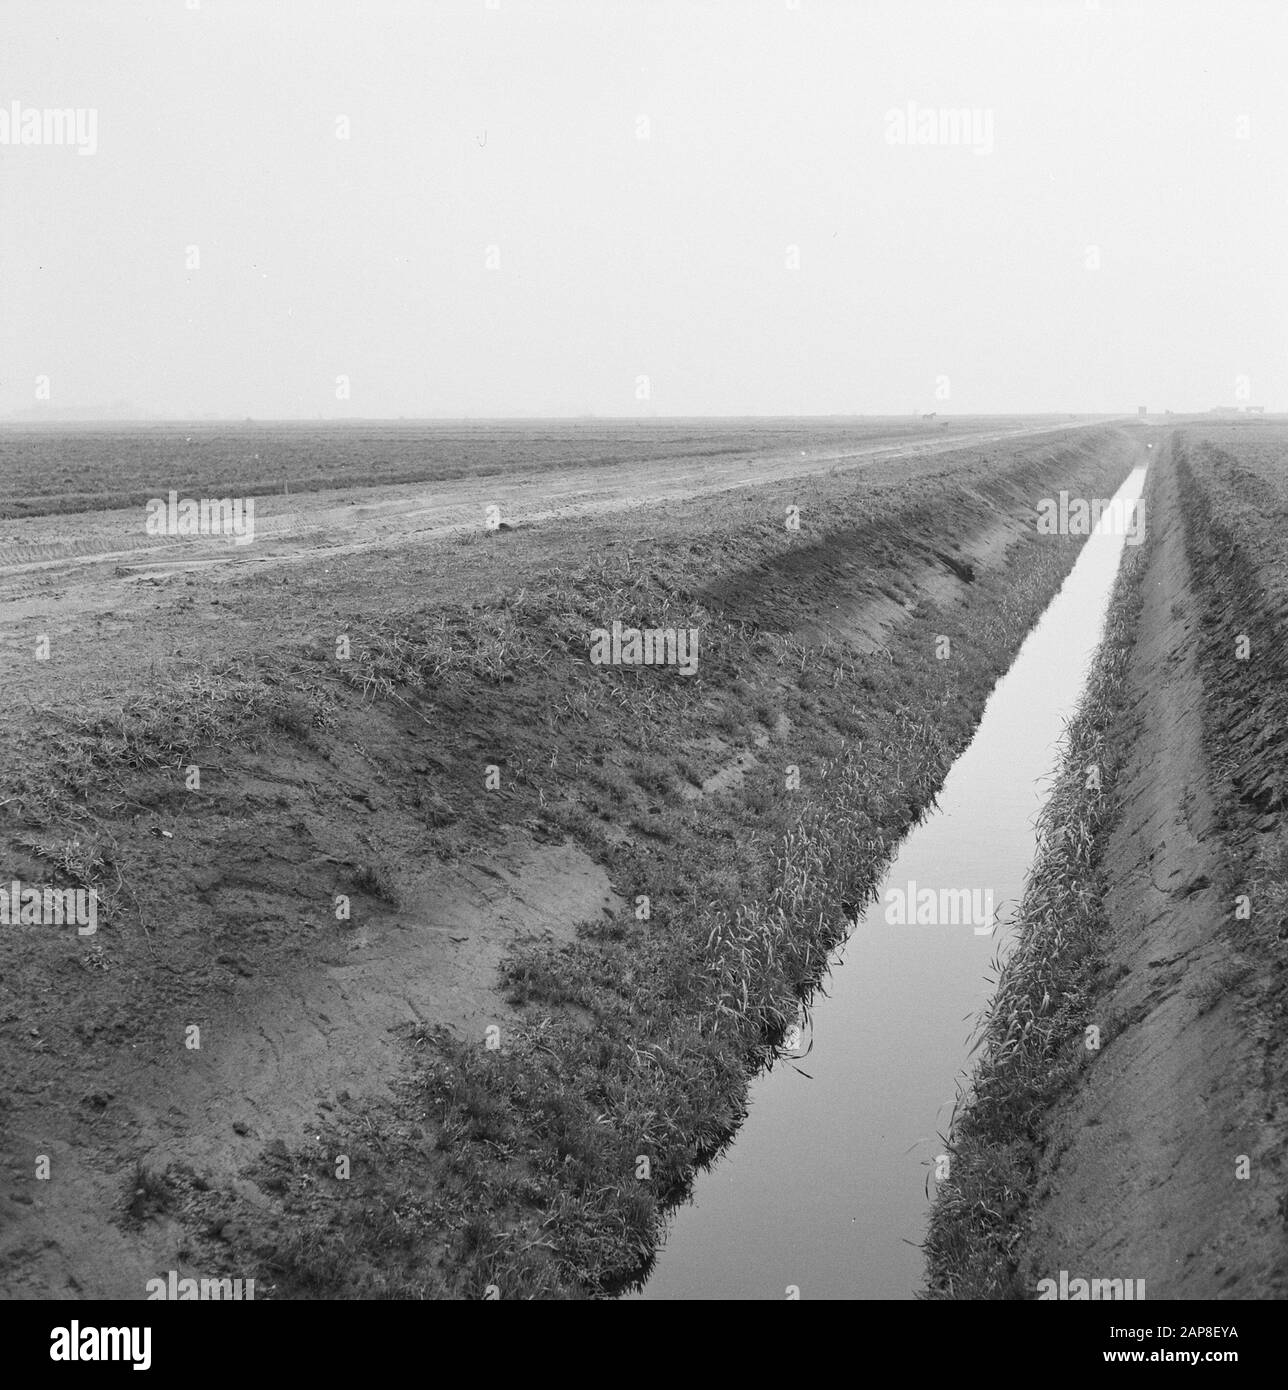 construction and improvement of roads, dikes and savings basins, main canal, peat road, Groningen Date: november 1959 Location: Groningen, Stadskanaal Keywords: construction and improving roads, dikes and savings basins, main channel Personname: peat road Stock Photo